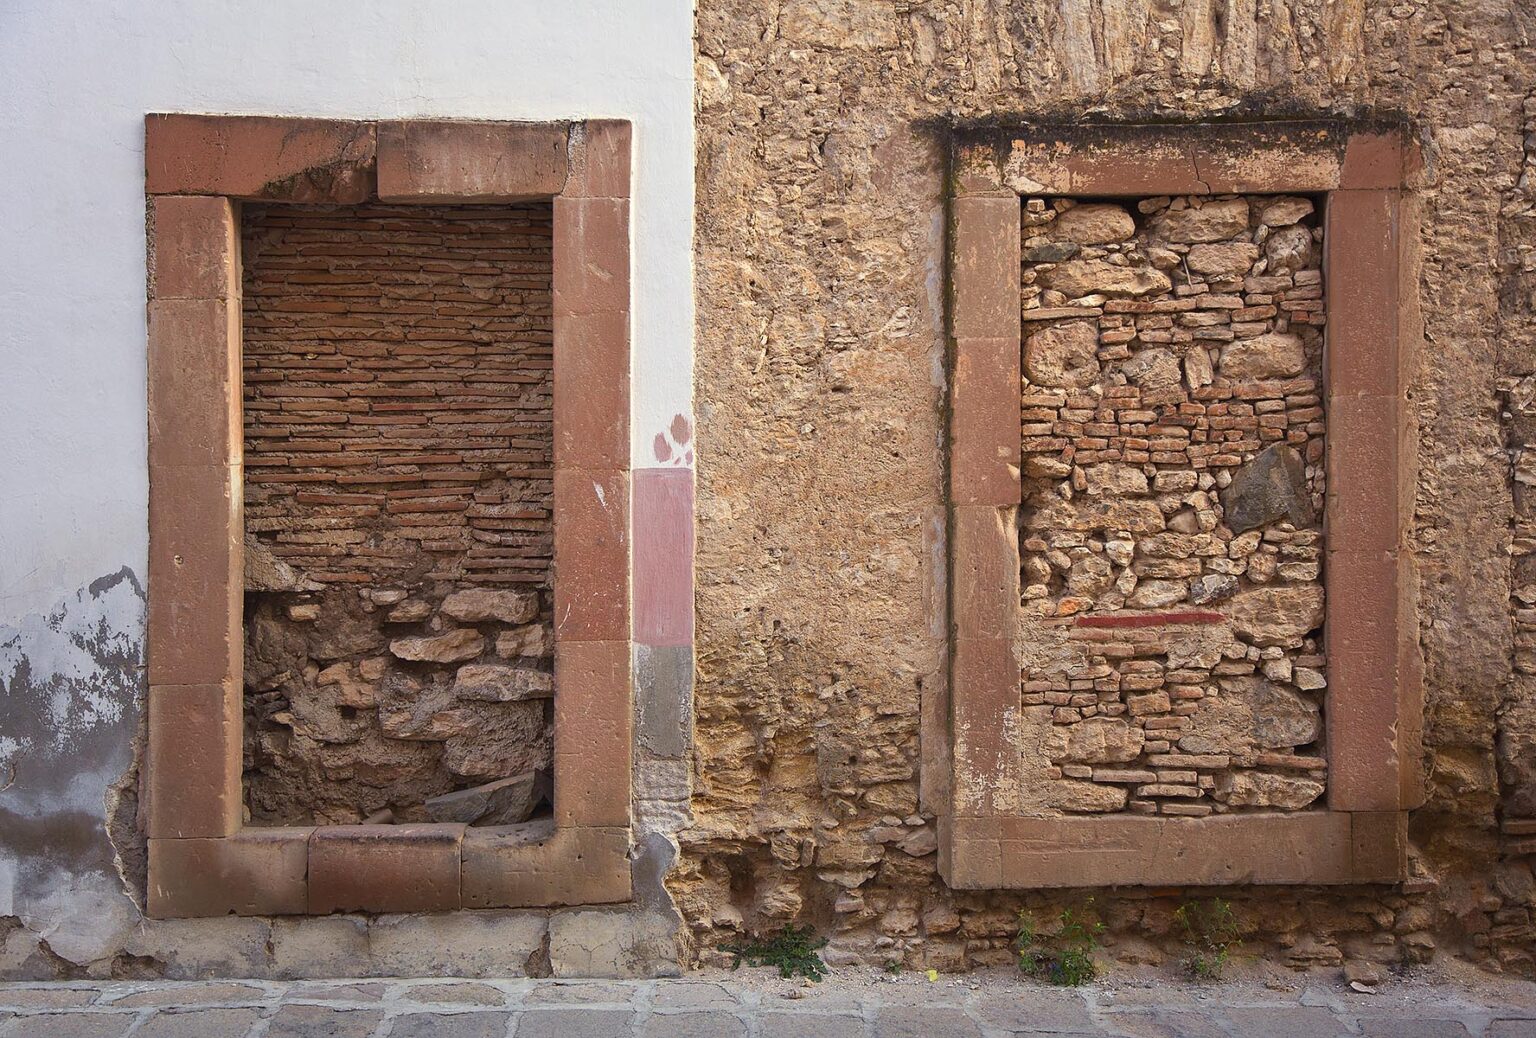 Stones block DOORWAYS in the ghost town of MINERAL DE POZOS which is now a small artist colony and tourist destination - GUANAJUATO, MEXICO